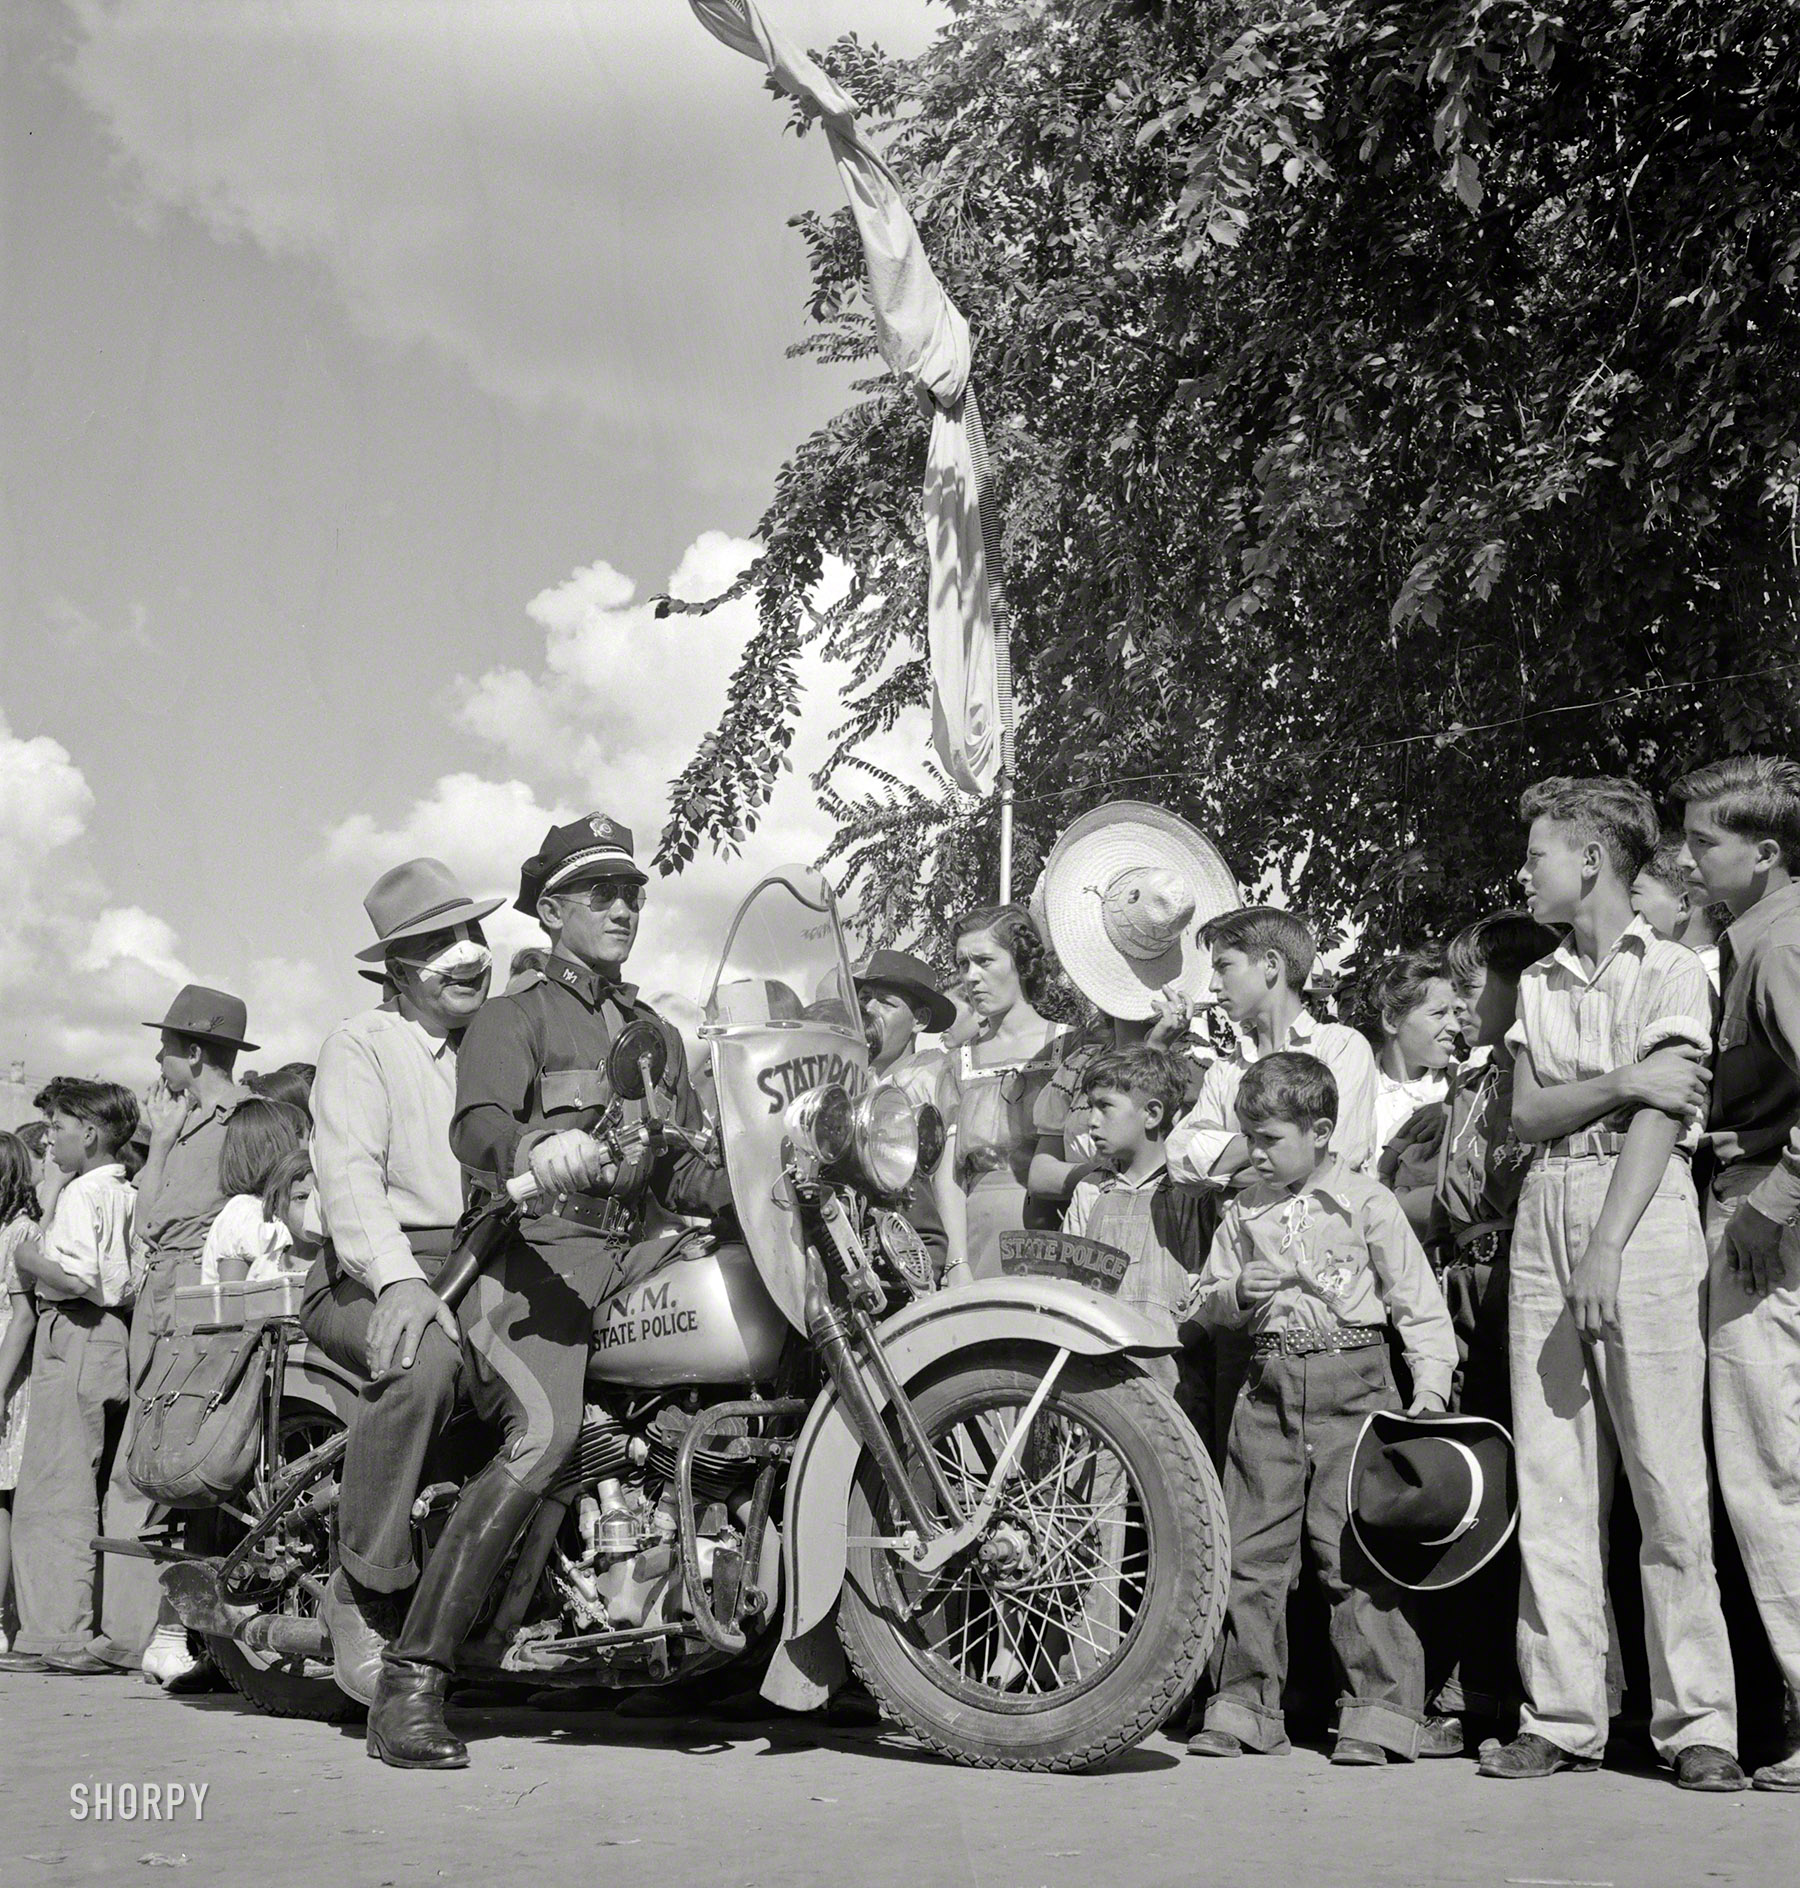 July 1940. "New Mexico State Police at Fiesta parade." Our second look at the festivities in Old Santa Fe. Photo by Russell Lee. View full size.